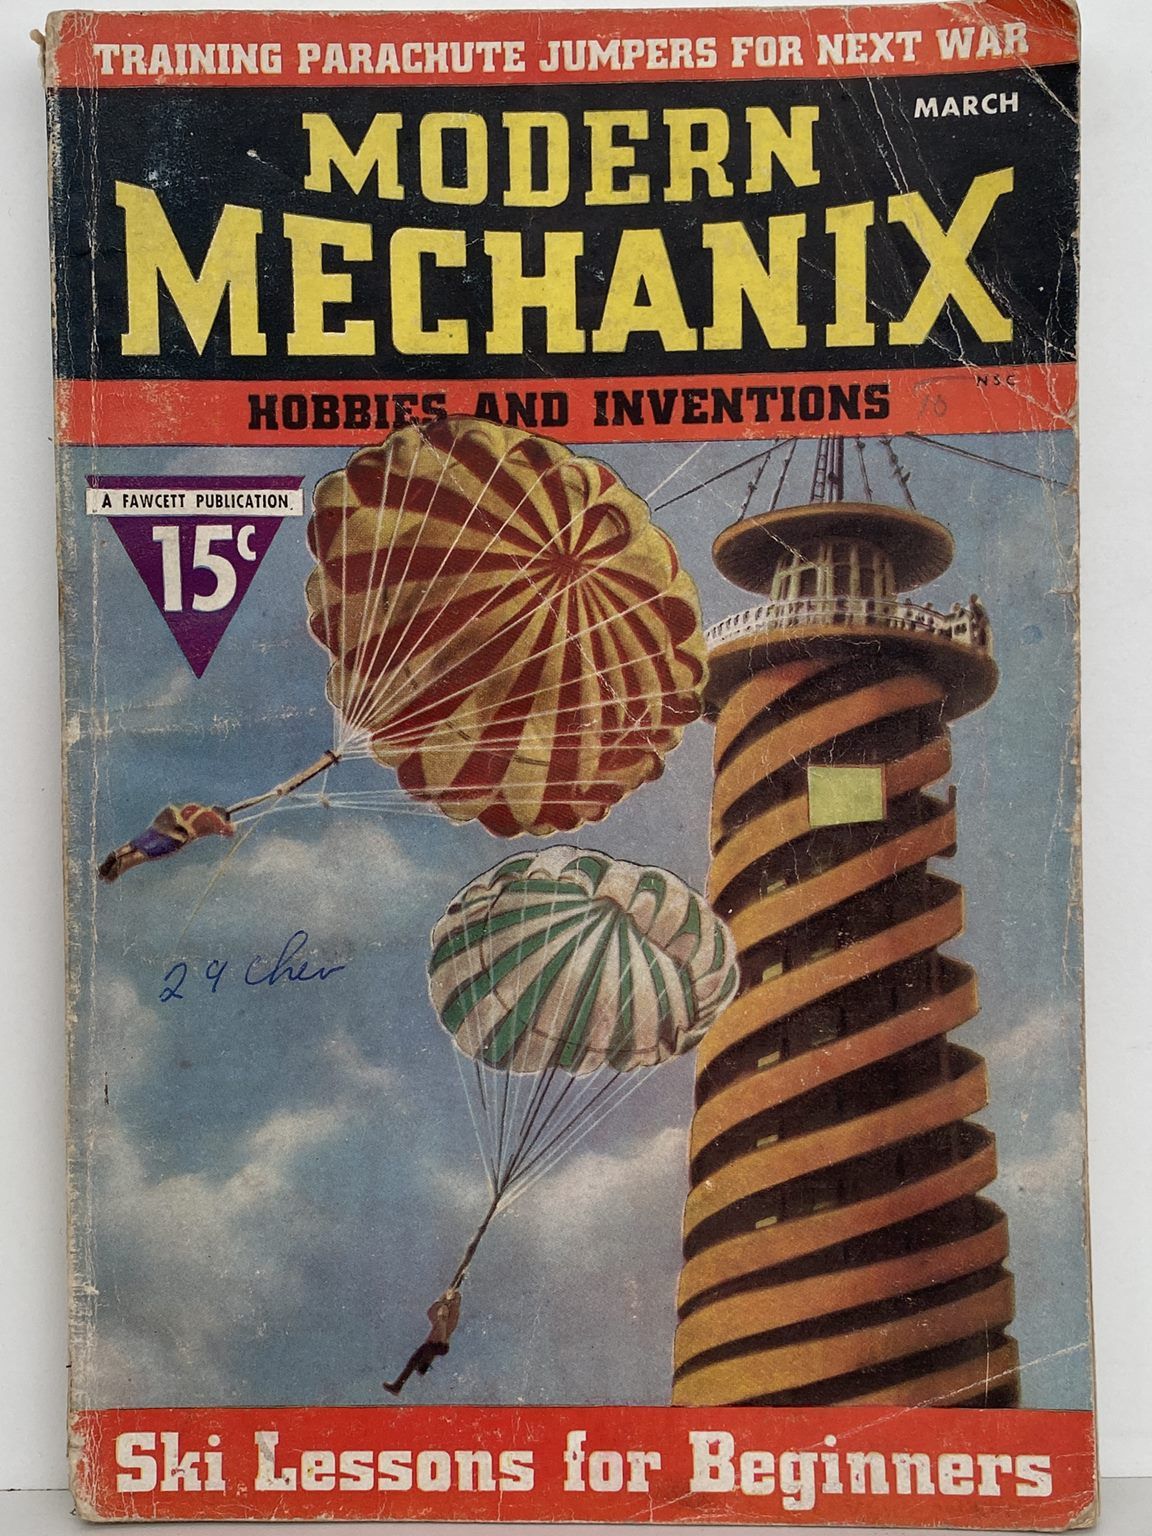 VINTAGE MAGAZINE: Modern Mechanix and Inventions - Vol 16, No. 5 - March 1937